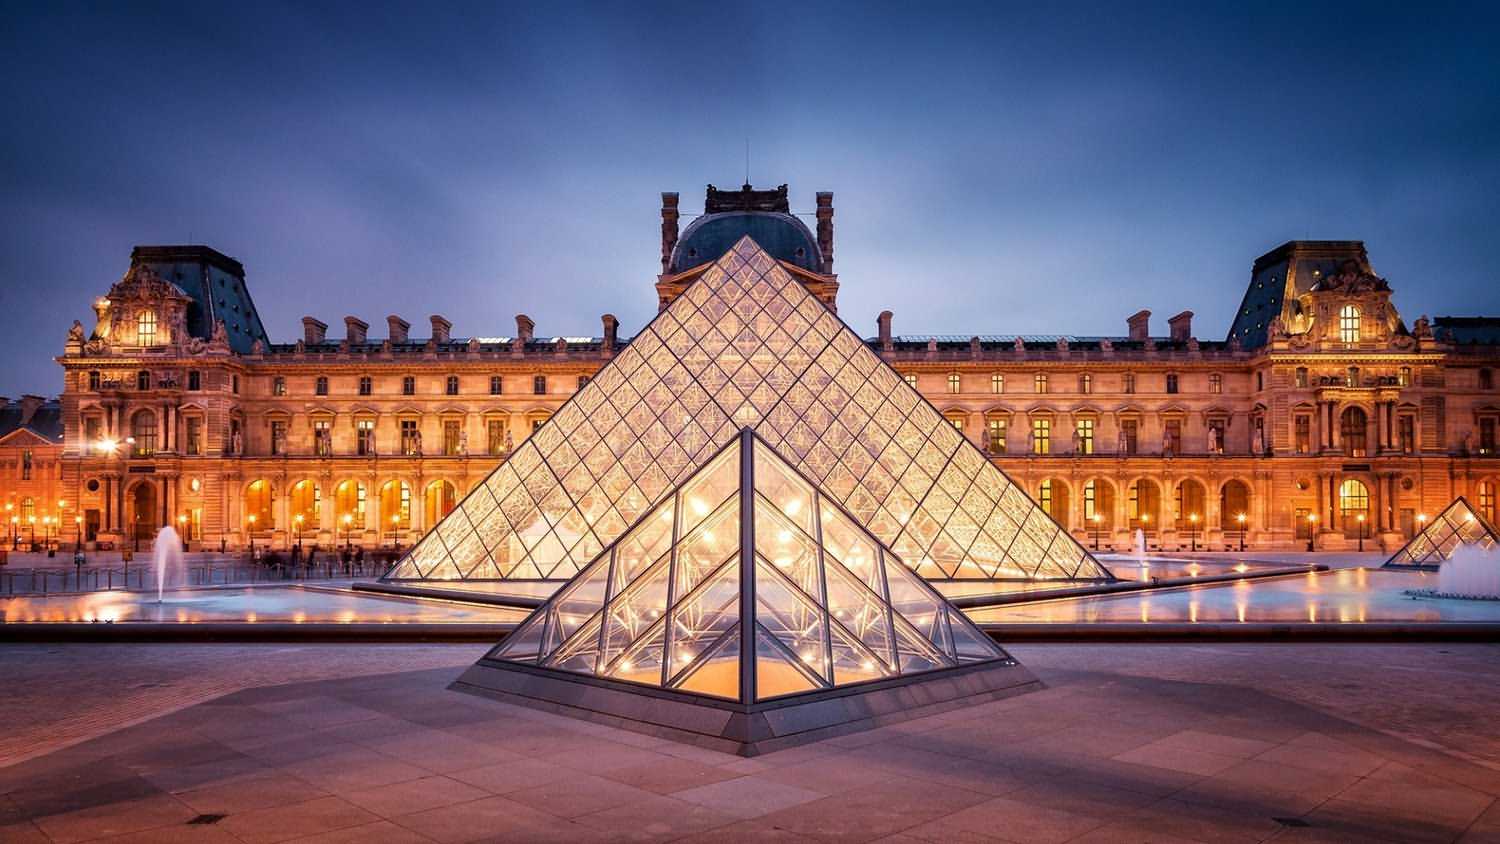 The Louvre (Louvre Museum)